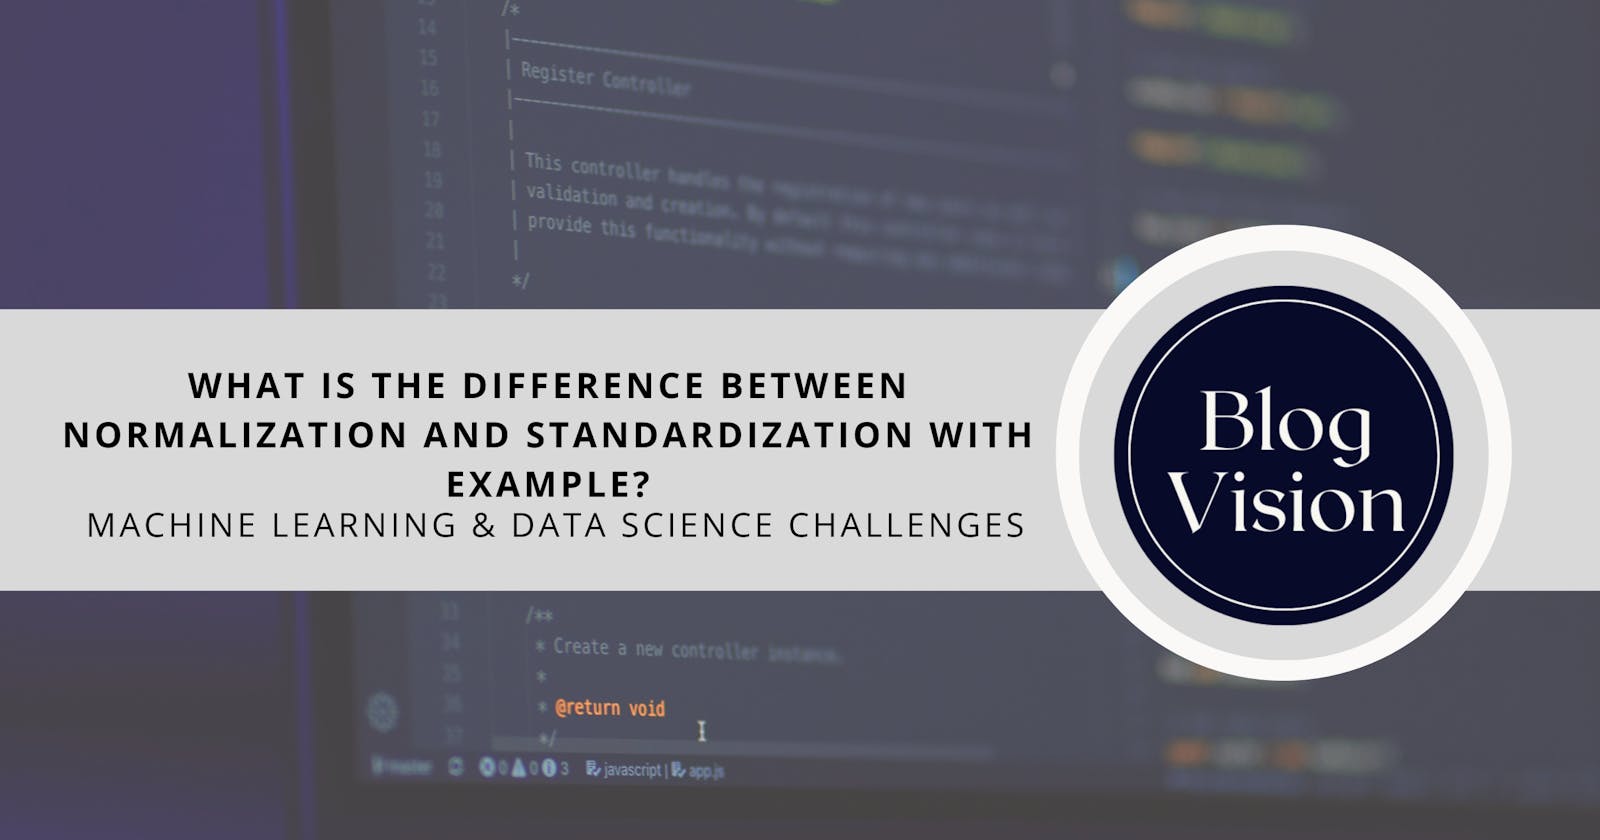 #47 Machine Learning & Data Science Challenge 47